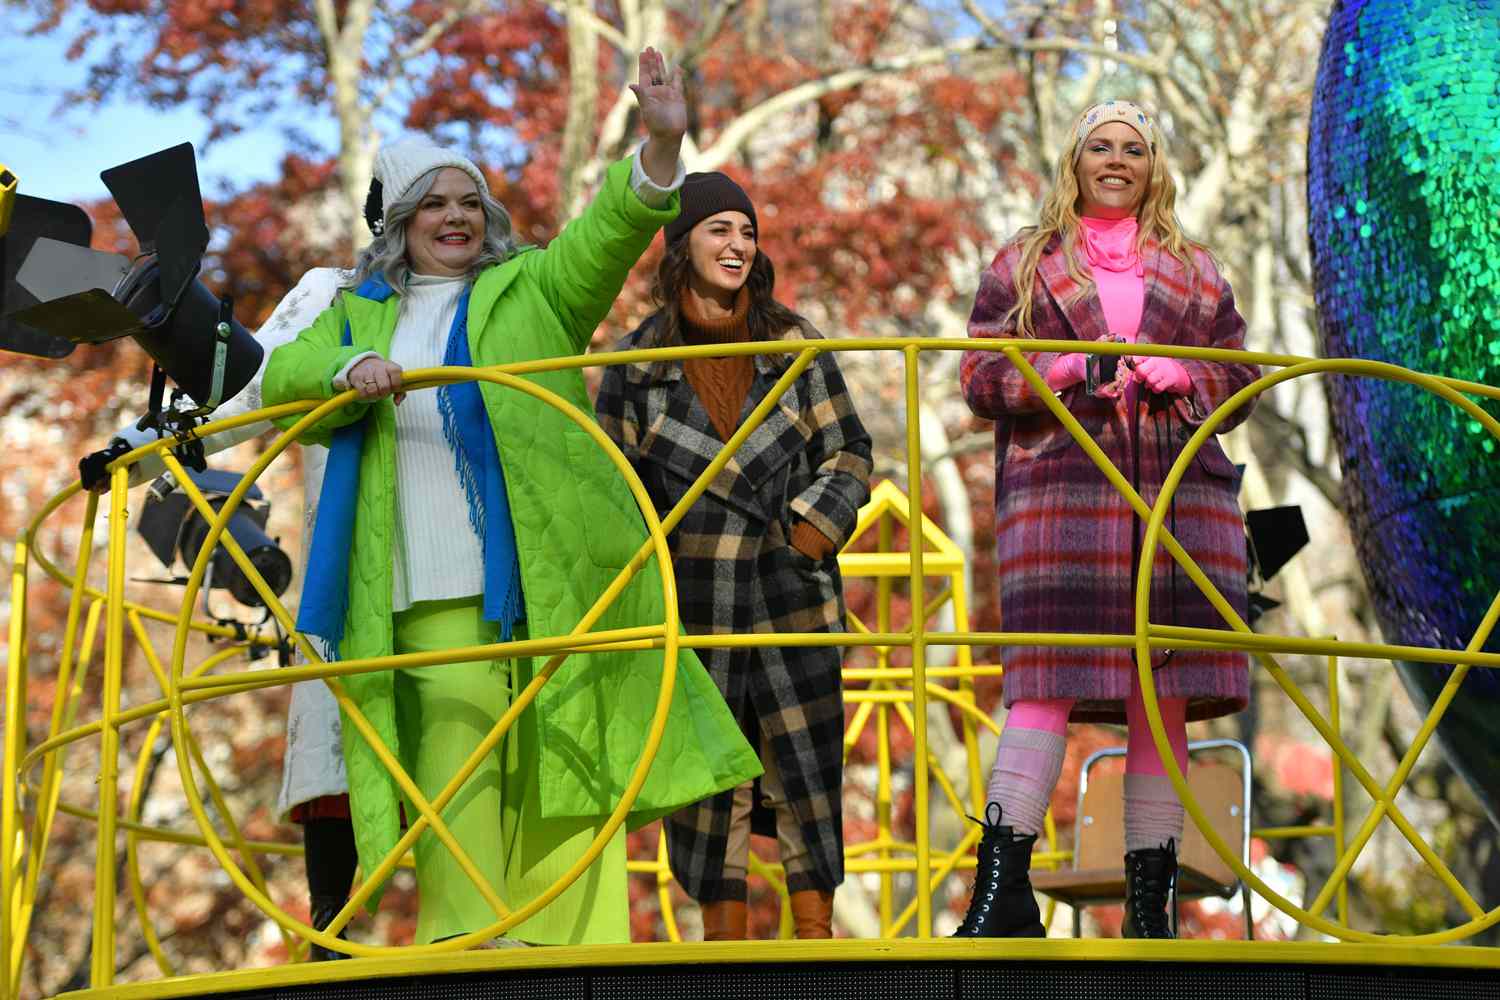 The 95th Macy's Thanksgiving Day Parade